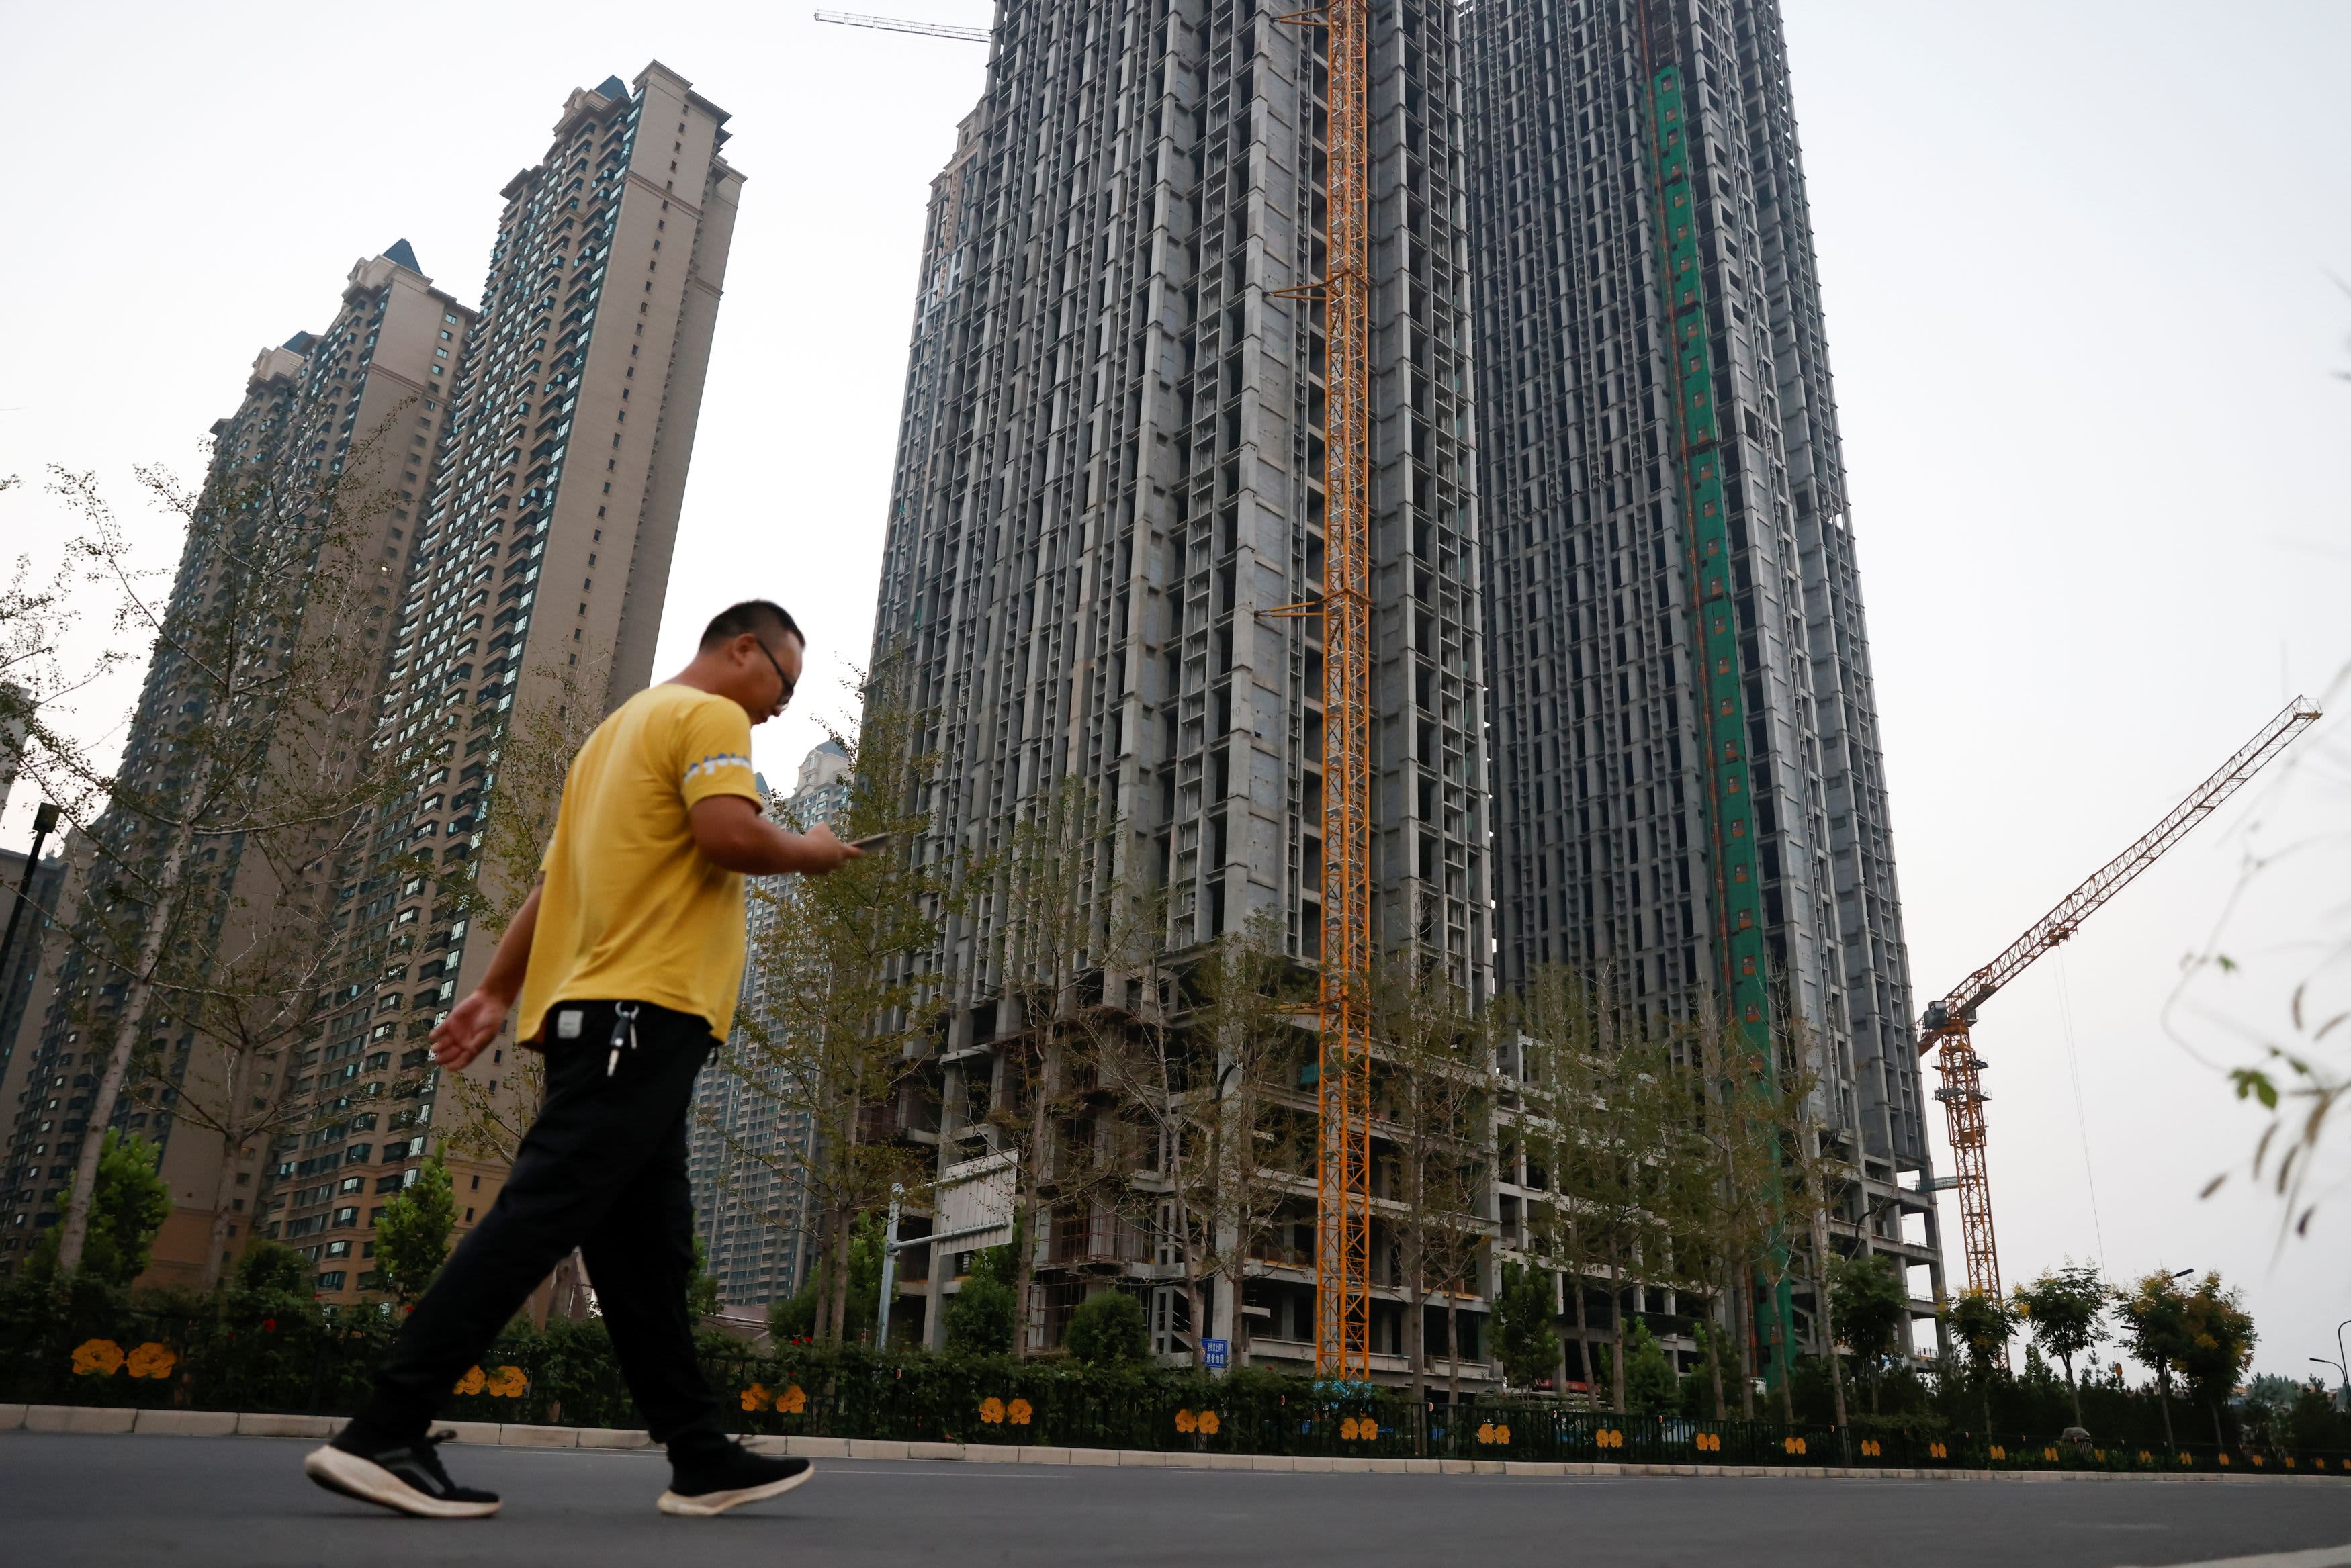 A man walks in front of unfinished residential buildings at the Evergrande Oasis, a housing complex developed by Evergrande Group, in Luoyang, China September 15, 2021. Picture taken September 15, 2021.